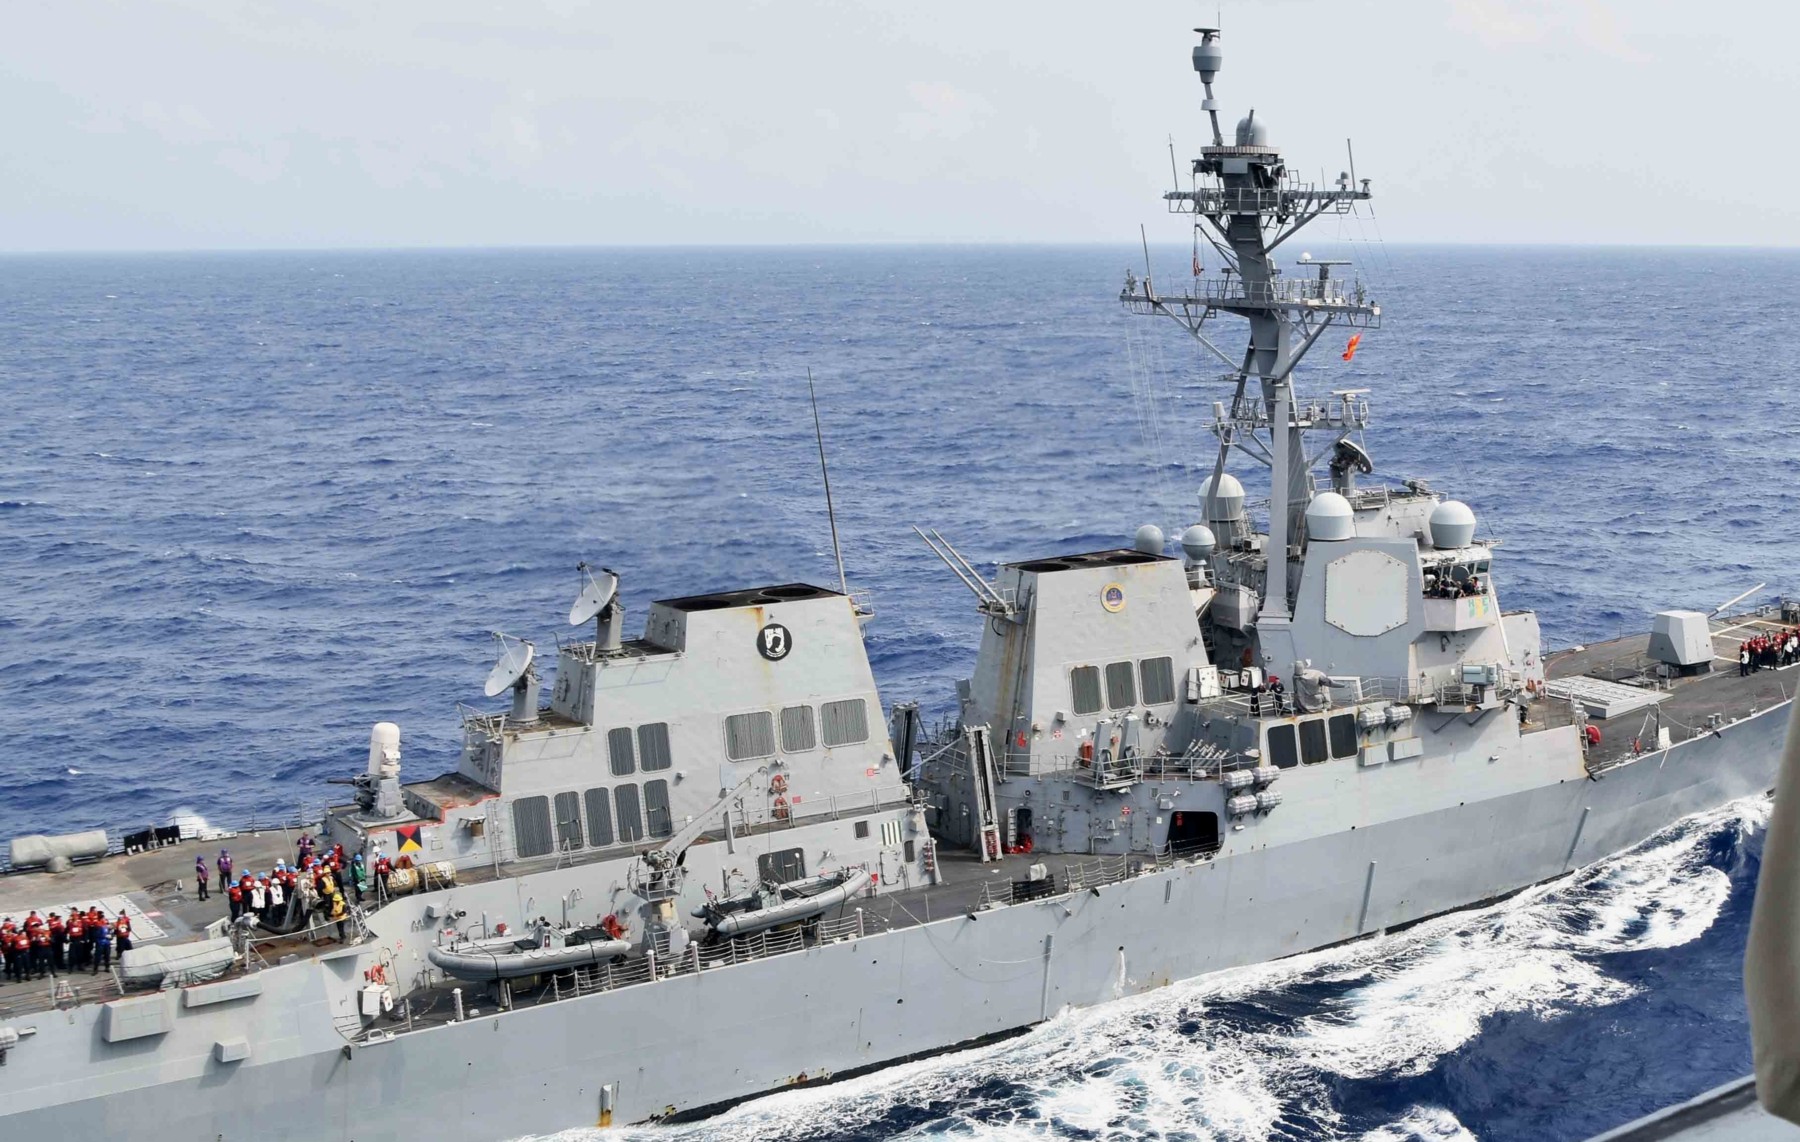 ddg-110 uss william p. lawrence arleigh burke class guided missile destroyer aegis us navy south china sea 46